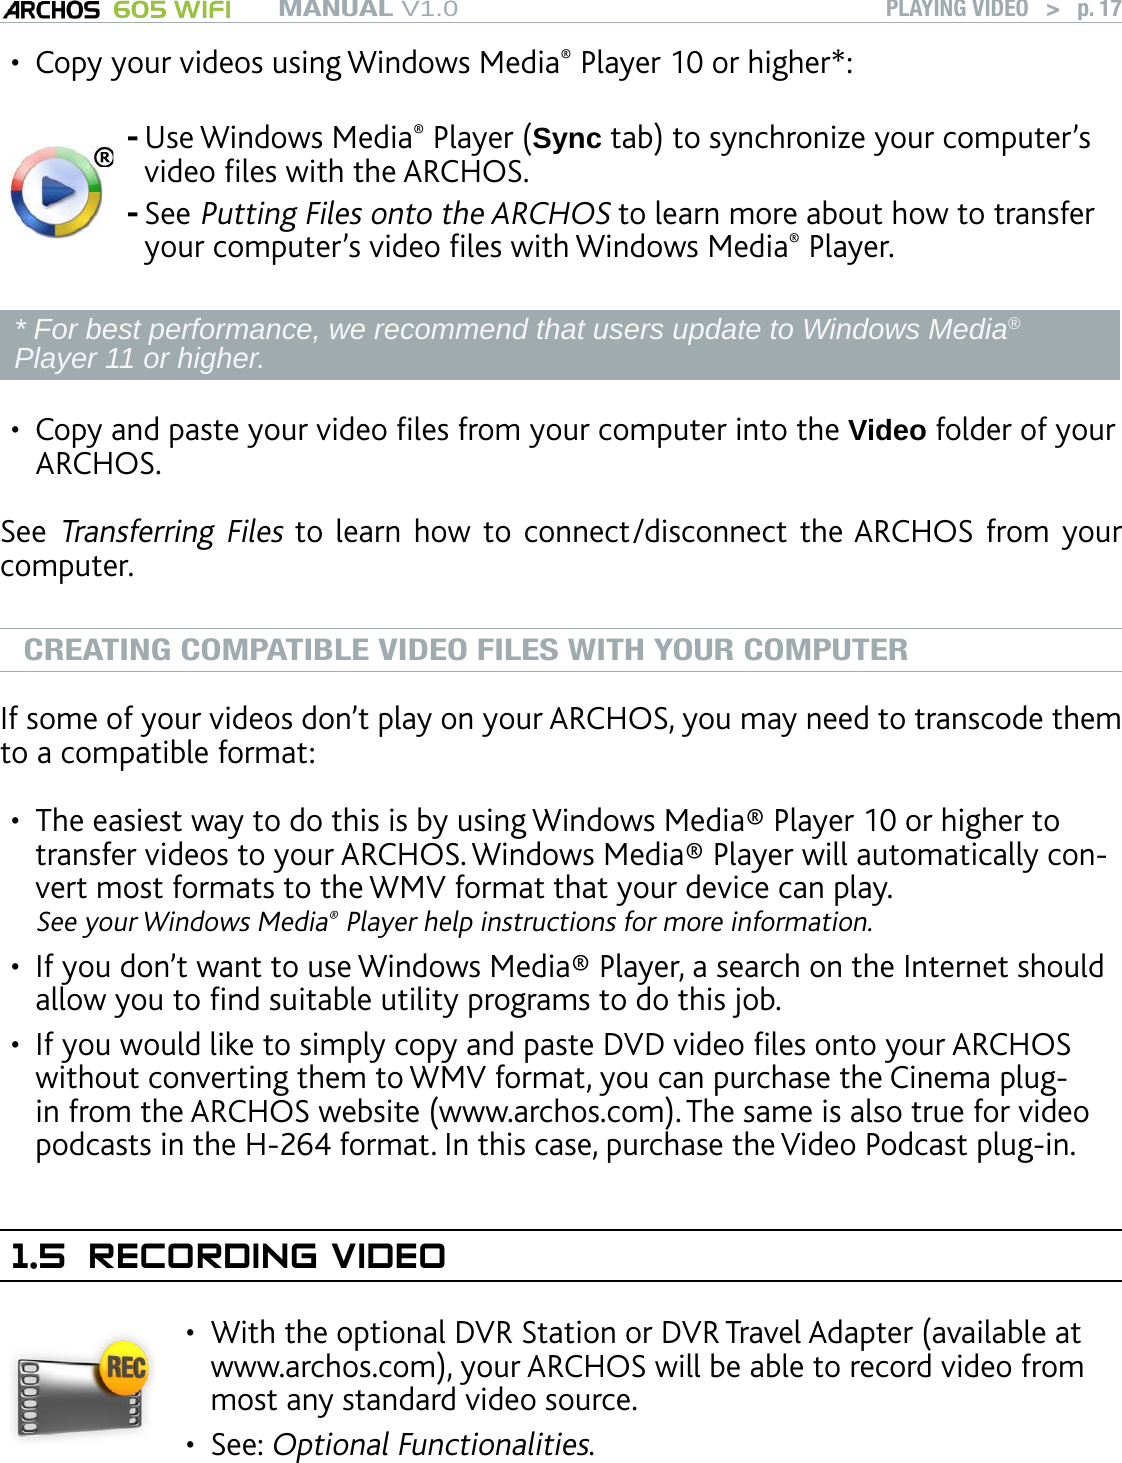 MANUAL V1.0 605 WIFI PLAYING VIDEO   &gt;   p. 17Copy your videos using Windows Media® Player 10 or higher*:Use Windows Media® Player (Sync tab) to synchronize your computer’s video les with the ARCHOS.See Putting Files onto the ARCHOS to learn more about how to transfer your computer’s video les with Windows Media® Player.--* For best performance, we recommend that users update to Windows Media® Player 11 or higher.Copy and paste your video les from your computer into the Video folder of your ARCHOS.See Transferring Files to learn how to  connect/disconnect  the ARCHOS from your computer.CREATING COMPATIBLE VIDEO FILES WITH YOUR COMPUTERIf some of your videos don’t play on your ARCHOS, you may need to transcode them to a compatible format:The easiest way to do this is by using Windows Media® Player 10 or higher to transfer videos to your ARCHOS. Windows Media® Player will automatically con-vert most formats to the WMV format that your device can play.  See your Windows Media® Player help instructions for more information.If you don’t want to use Windows Media® Player, a search on the Internet should allow you to nd suitable utility programs to do this job.If you would like to simply copy and paste DVD video les onto your ARCHOS without converting them to WMV format, you can purchase the Cinema plug-in from the ARCHOS website (www.archos.com). The same is also true for video podcasts in the H-264 format. In this case, purchase the Video Podcast plug-in.1.5  RECORDING VIDEOWith the optional DVR Station or DVR Travel Adapter (available at www.archos.com), your ARCHOS will be able to record video from most any standard video source.See: Optional Functionalities.•••••••